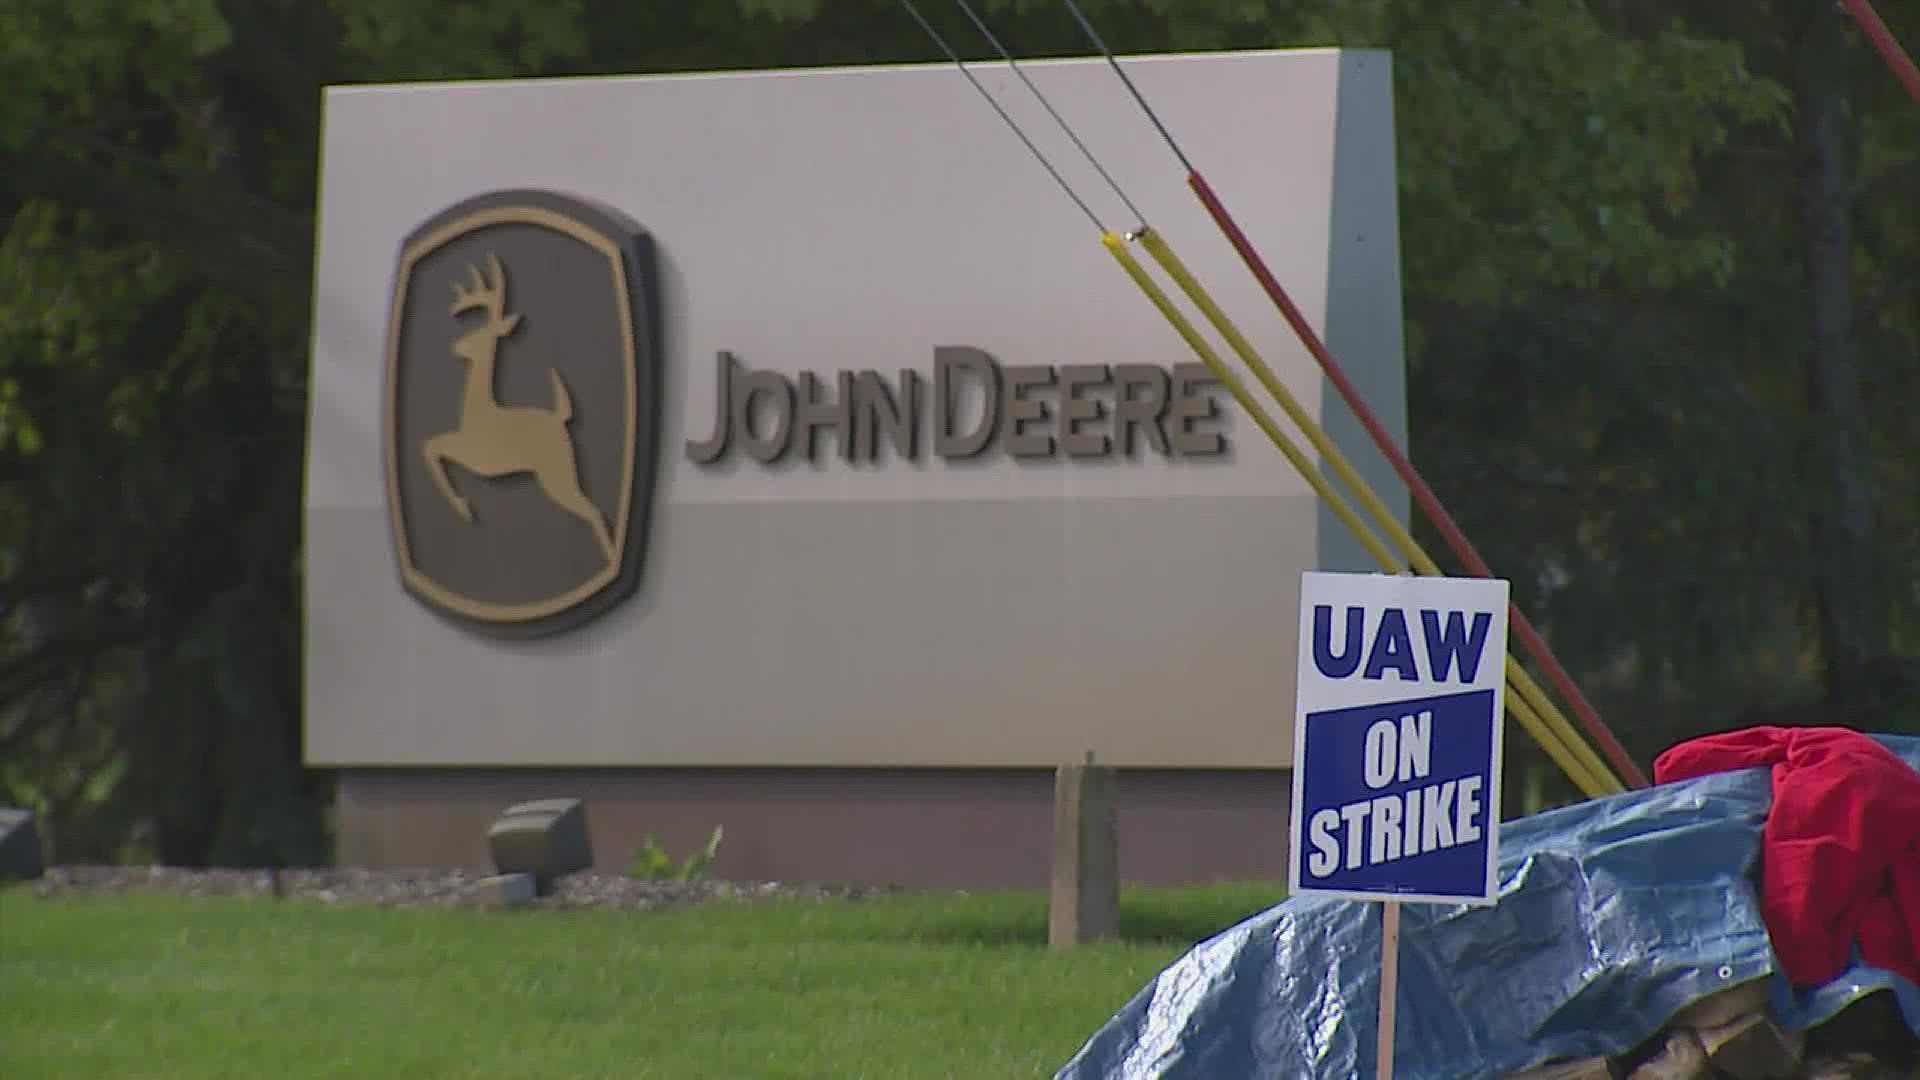 Union workers will stay on strike after turning down a proposed contract.